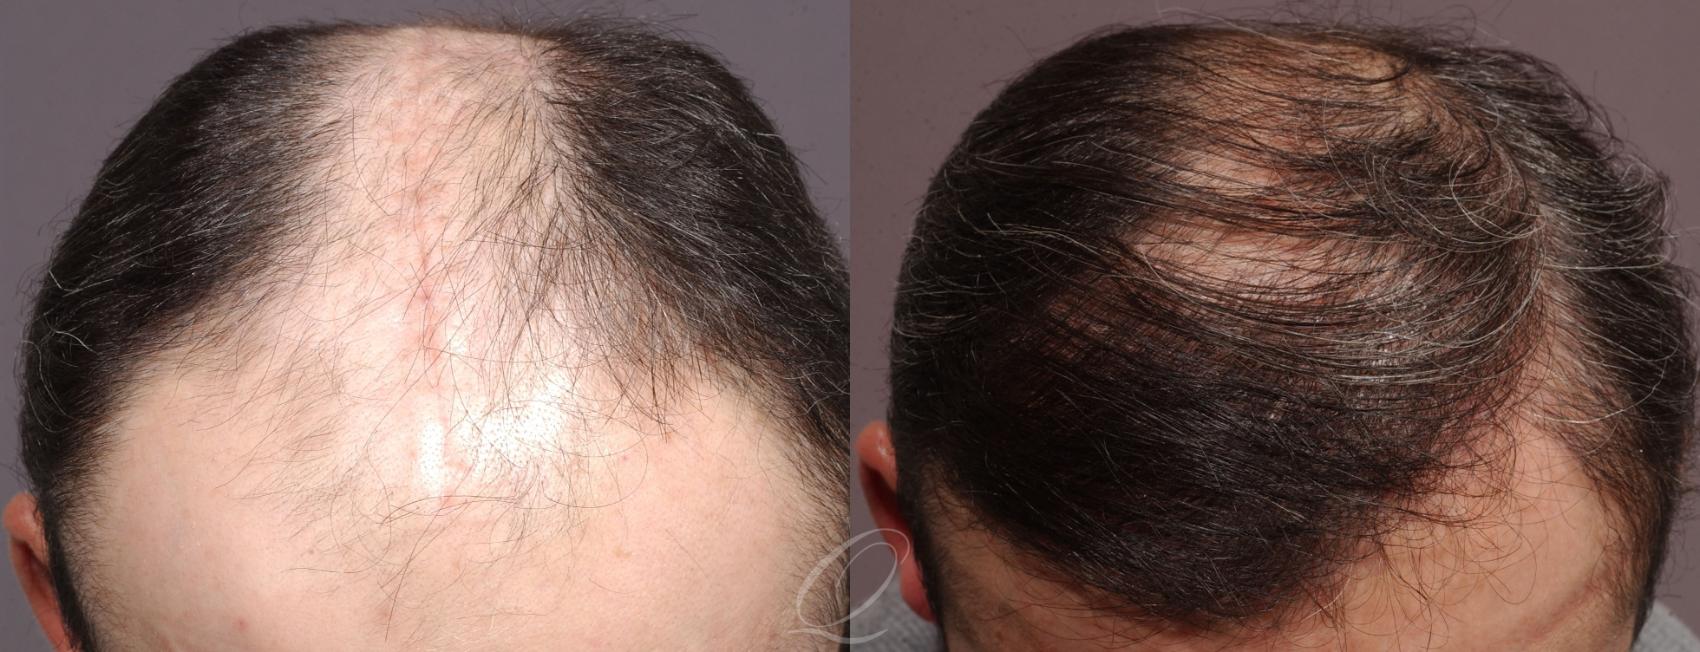 FUT Case 1041 Before & After View #2 | Rochester, Buffalo, & Syracuse, NY | Quatela Center for Hair Restoration